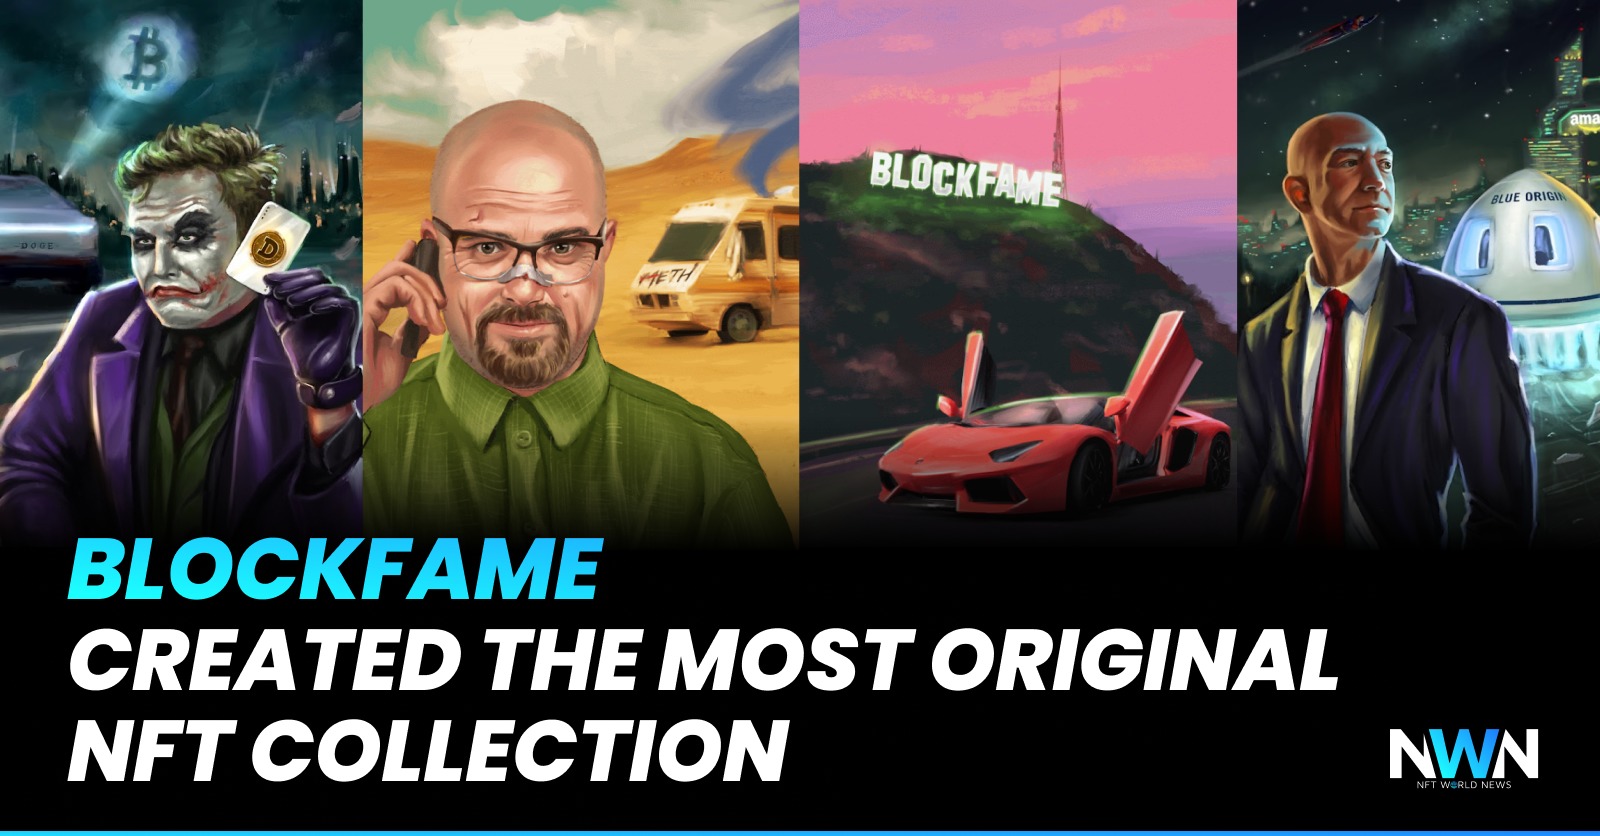 BlockFame Created The Most Original NFT Collection